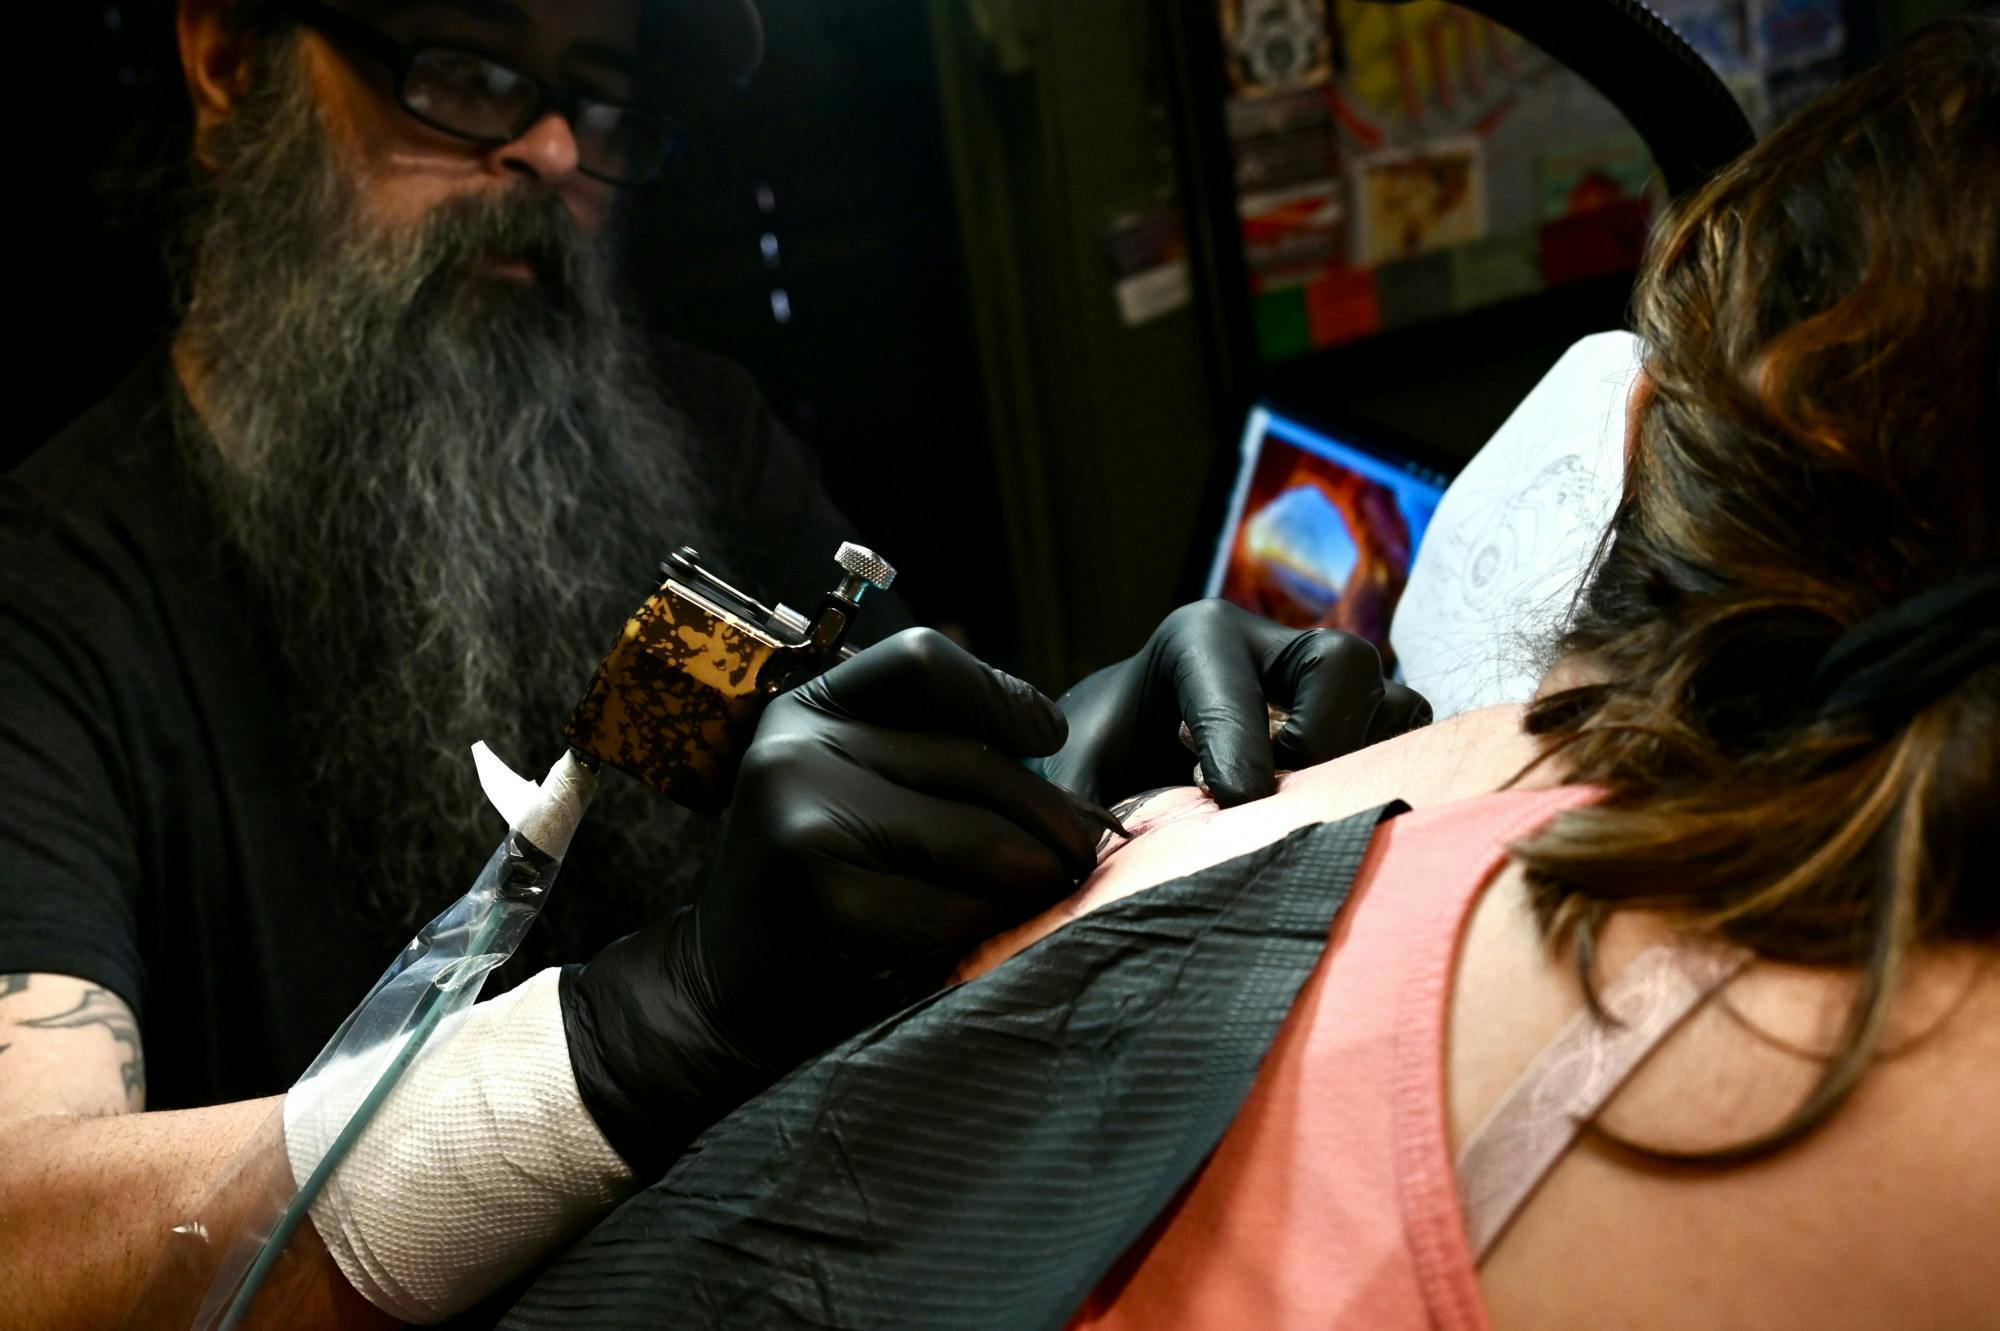 A Guide to Your First Tattoo According to a Tattoo Artist  Teen Vogue